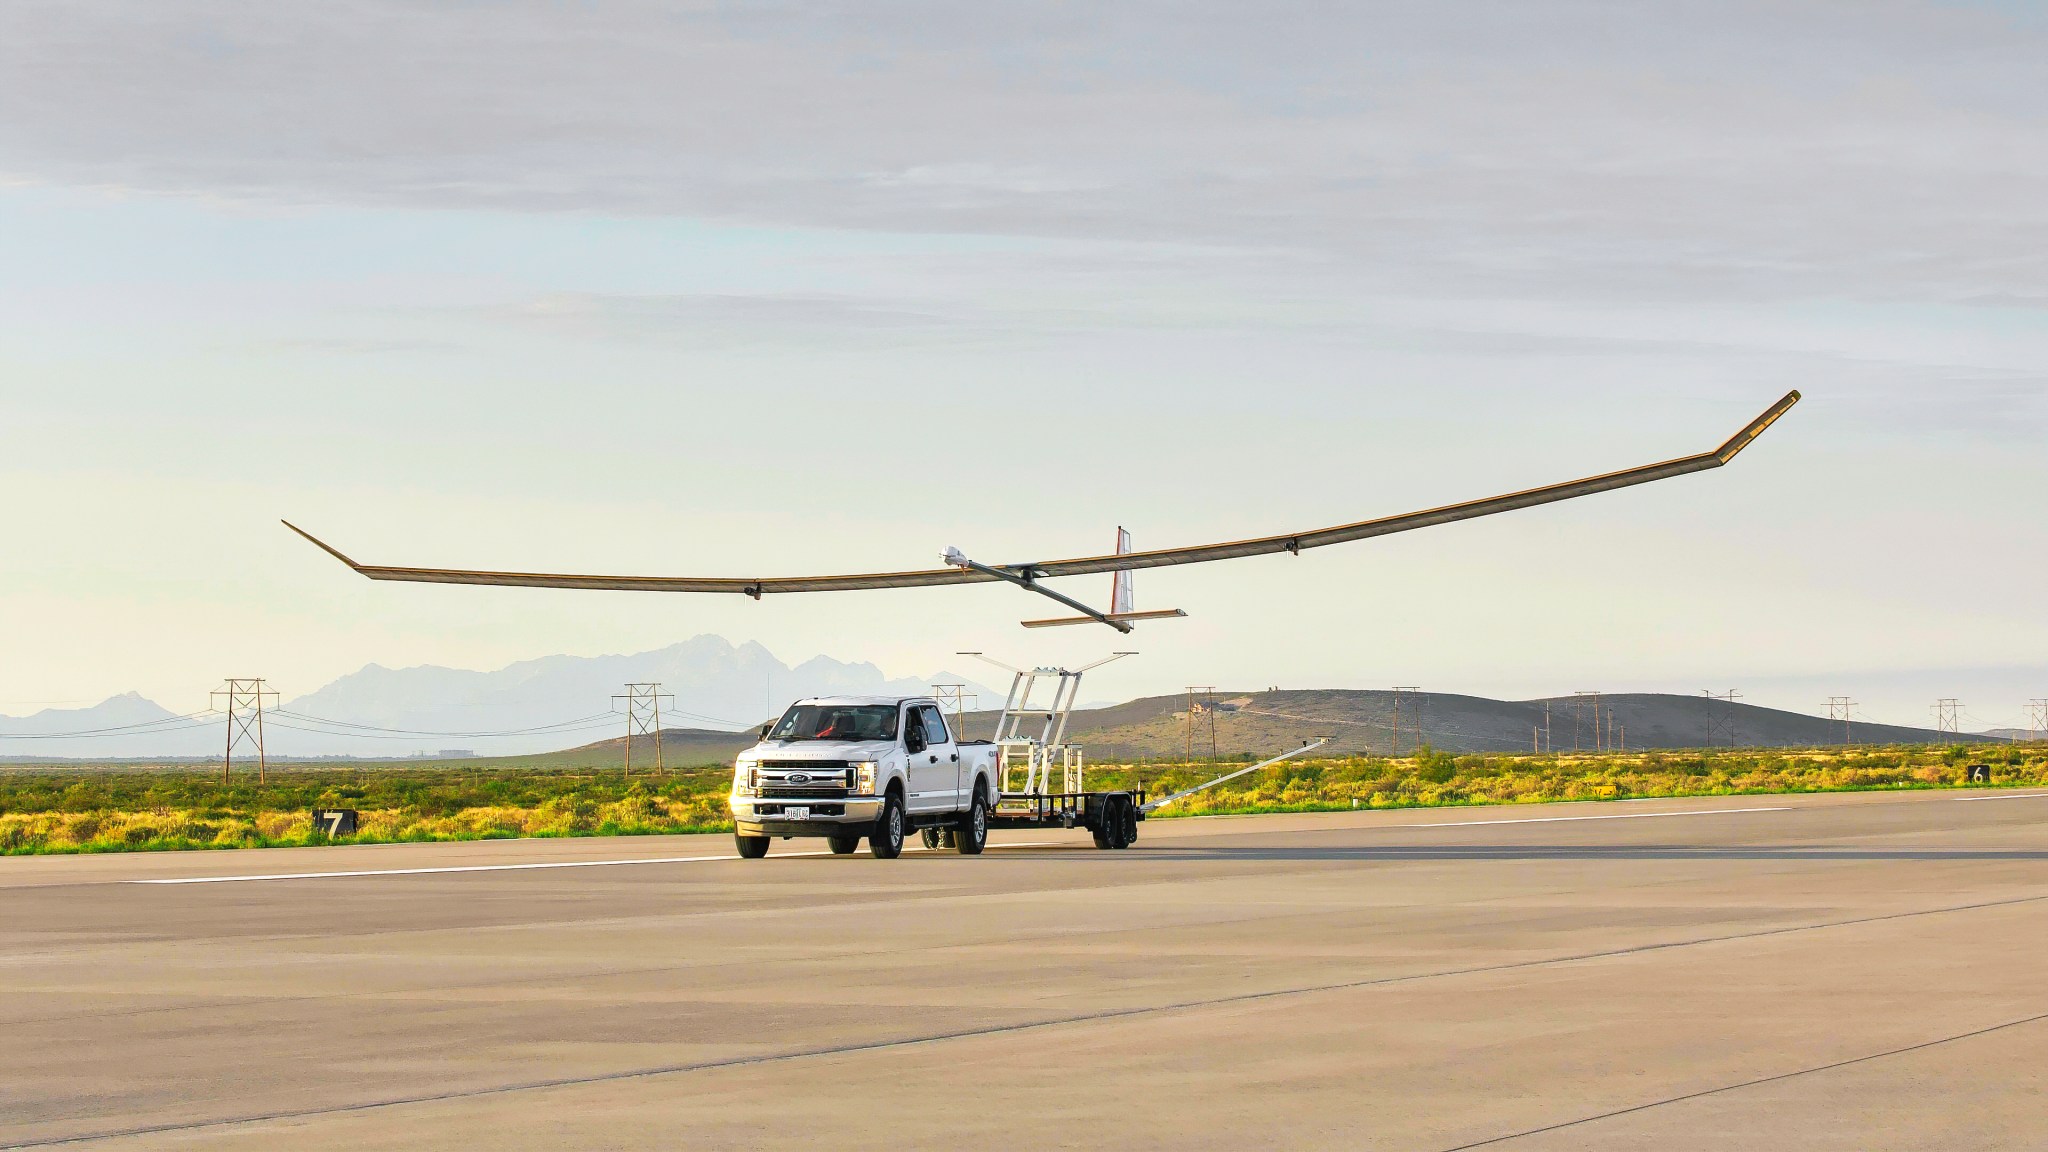 The Swift HALE high-altitude, long-endurance UAV taking off with a truck in the foreground